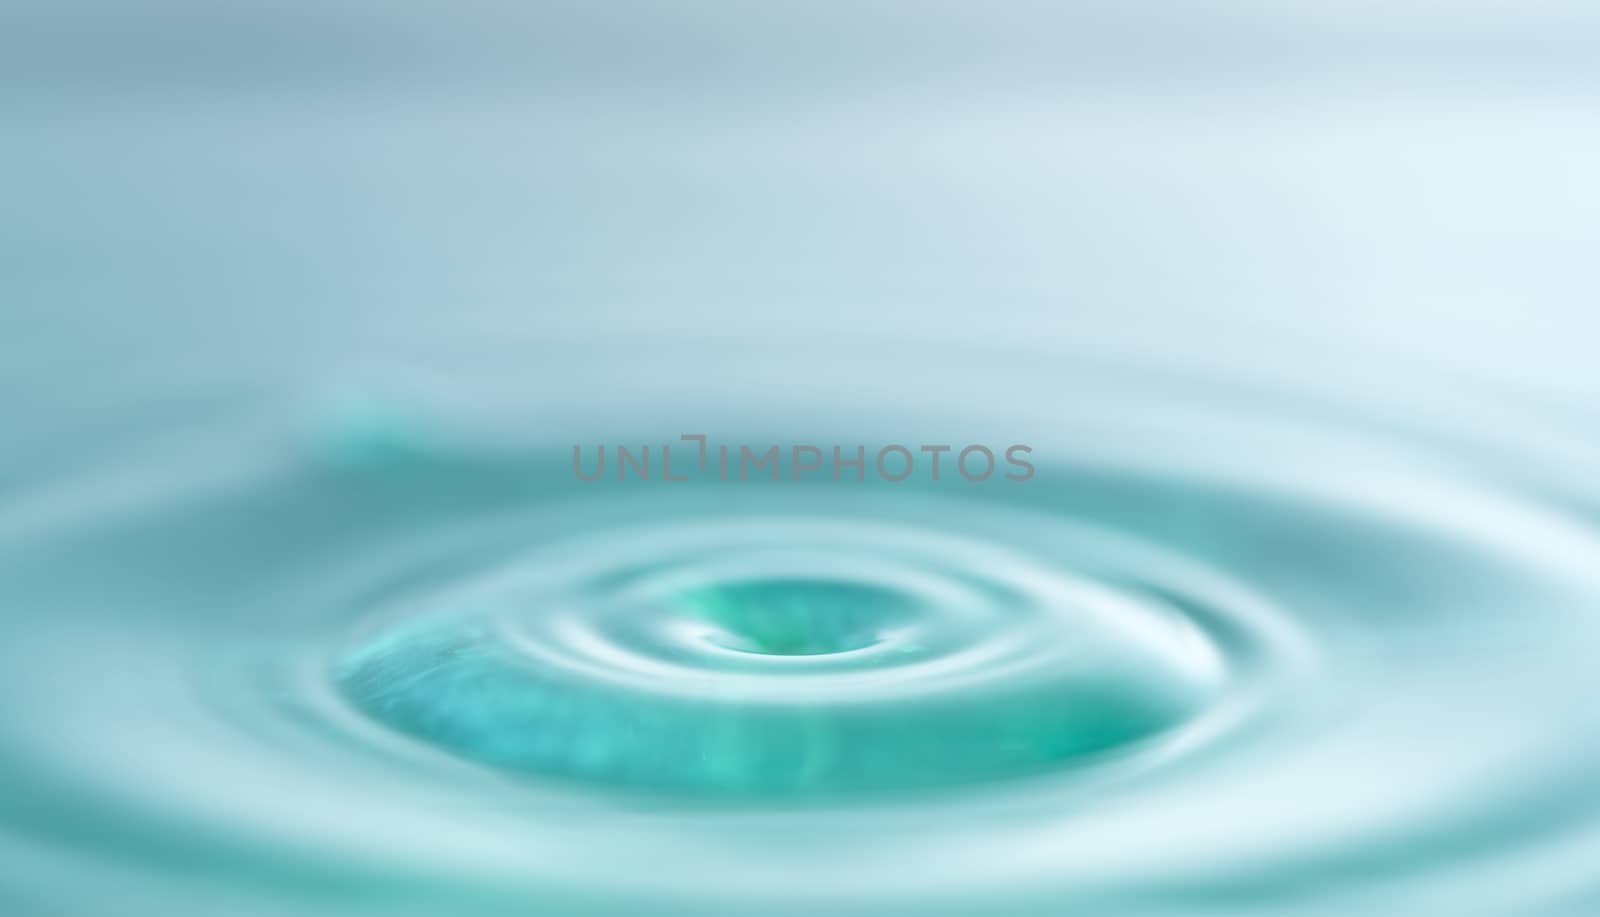 Water droplets science experiment and art concept bright color background
Natural.